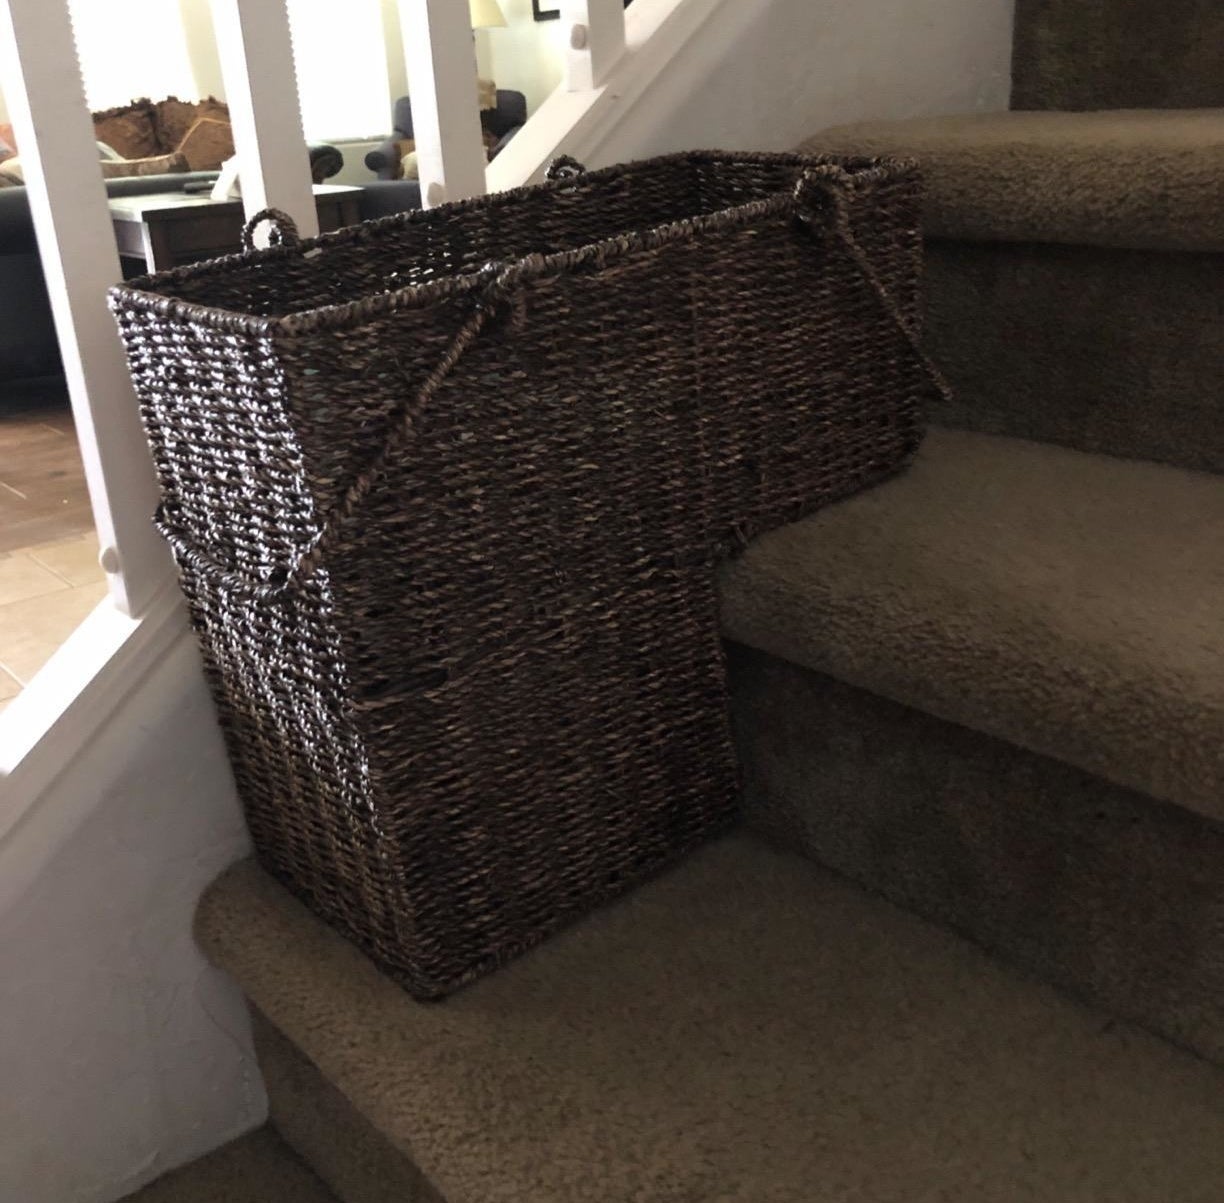 Reviewer image of the basket on their stairs